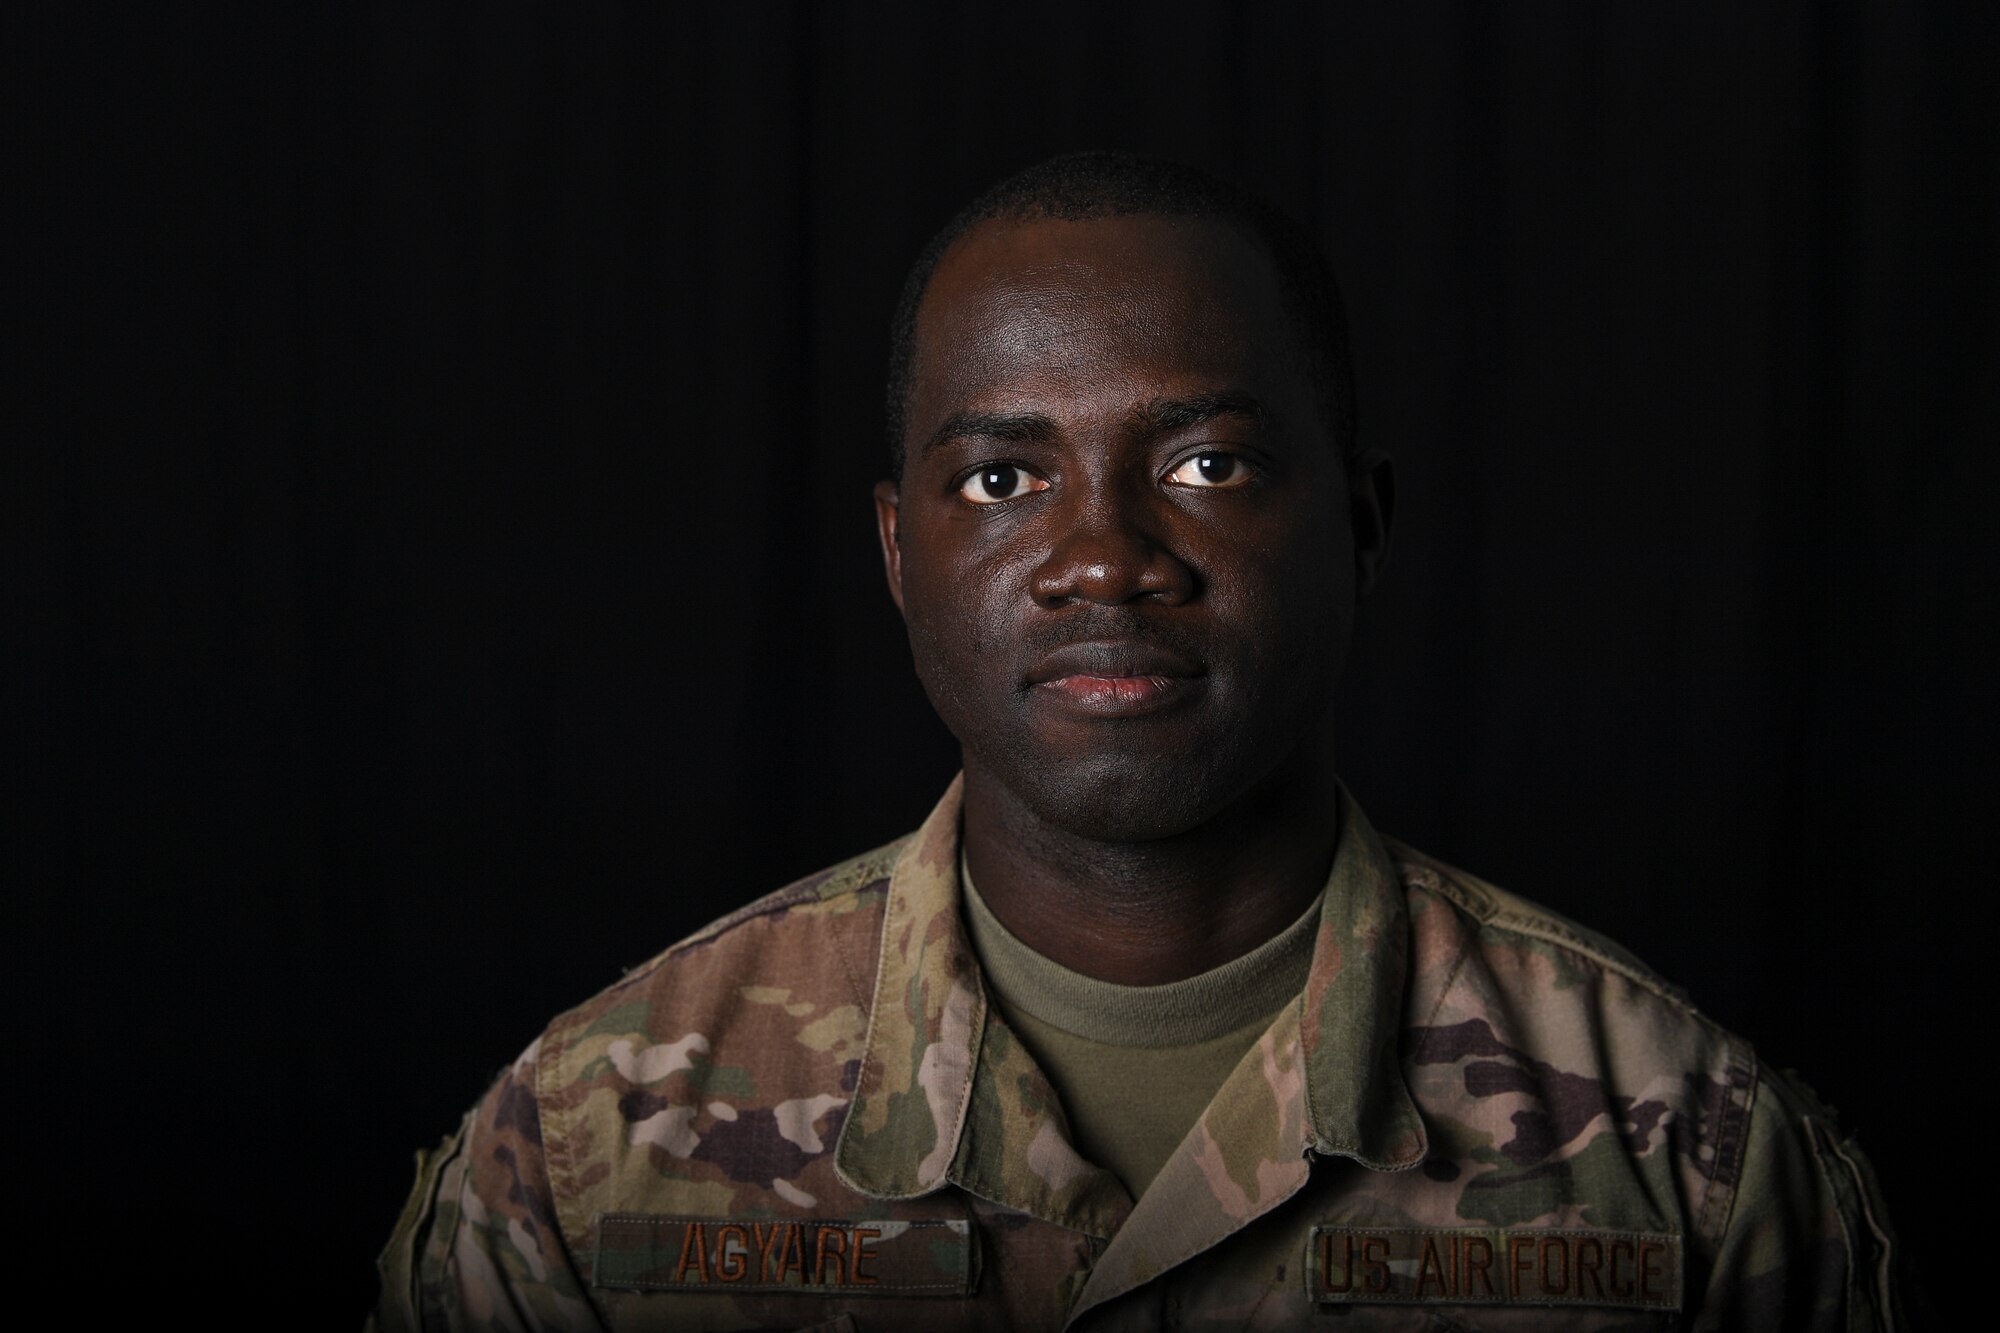 U.S. Air Force Senior Airman Theophilus Agyare, 380th Expeditionary Contracting Squadron contracting officer, poses for a photo at Al Dhafra Air Base, United Arab Emirates, Jan. 17, 2019. In 2014, Agyare received a visa and left his home country, to fulfill his childhood dream of being in the military while supporting his family back home in Ghana. (U.S. Air Force photo by Senior Airman Mya M. Crosby)